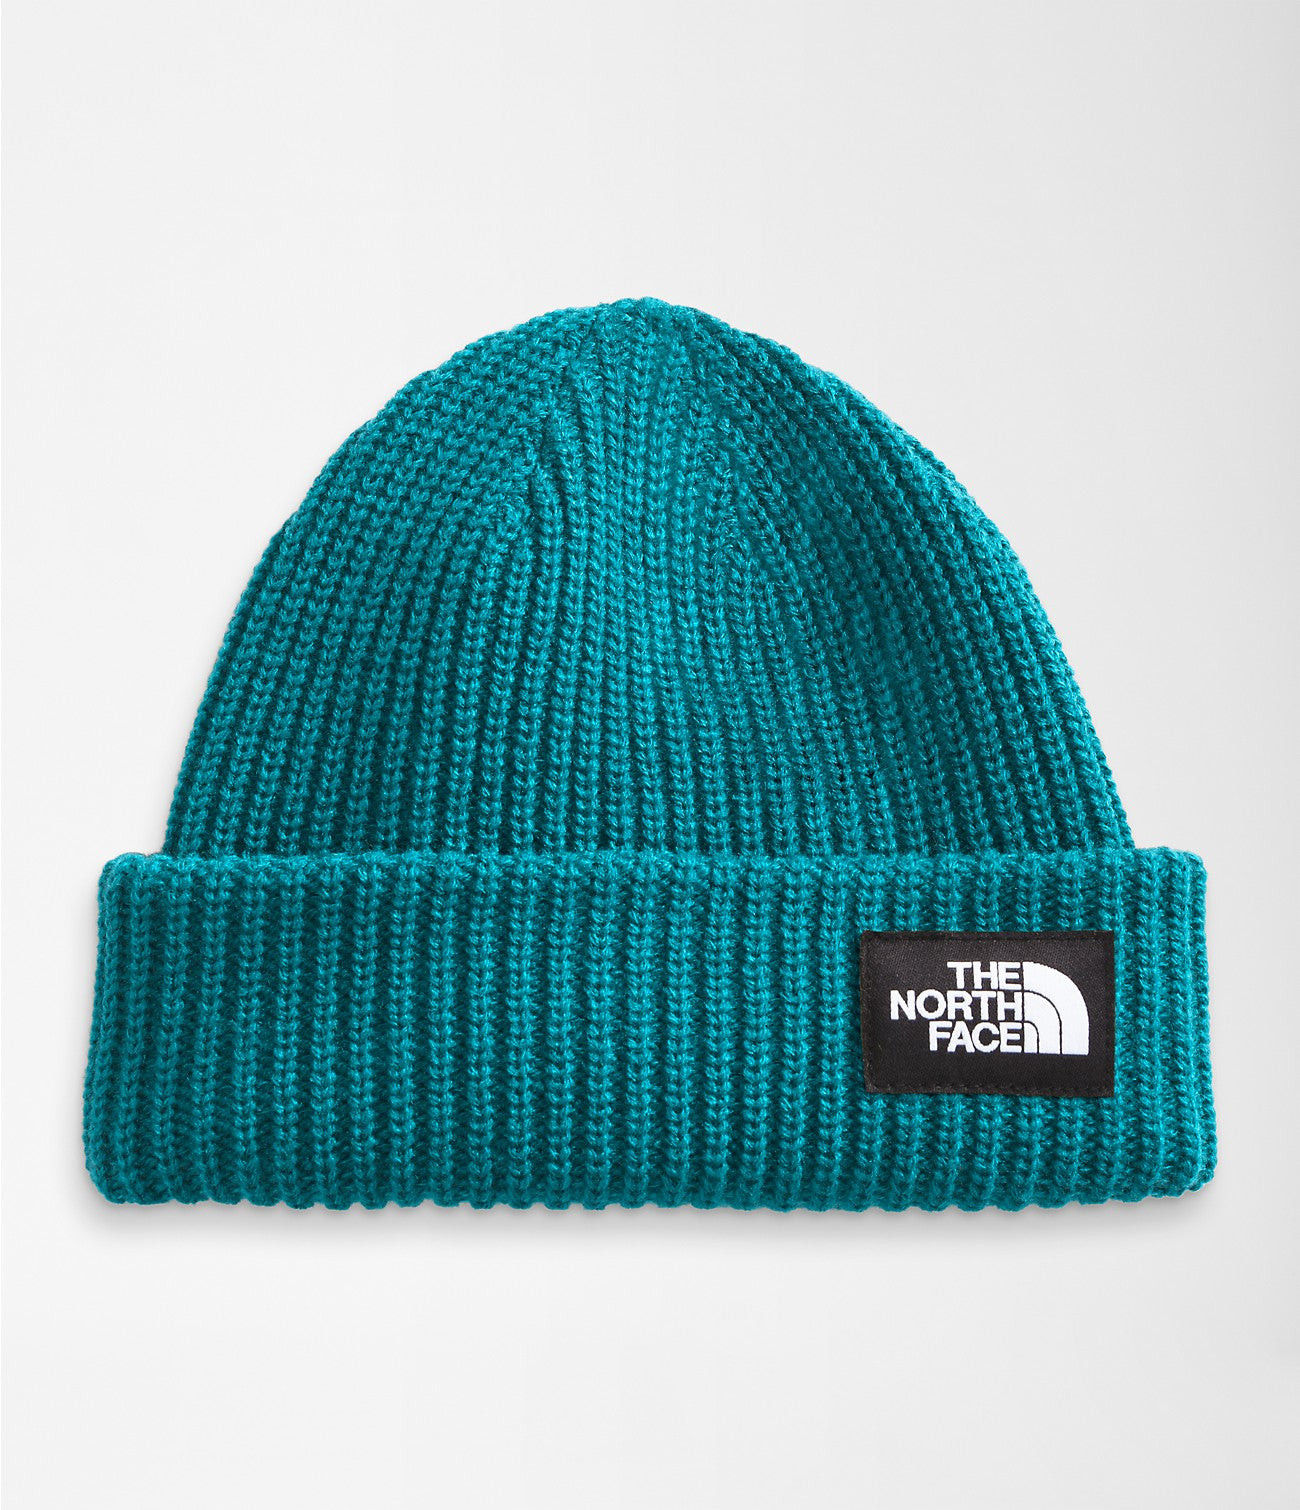 The North Face Youth Salty Dog Lined Beanie DEEP LAGOON